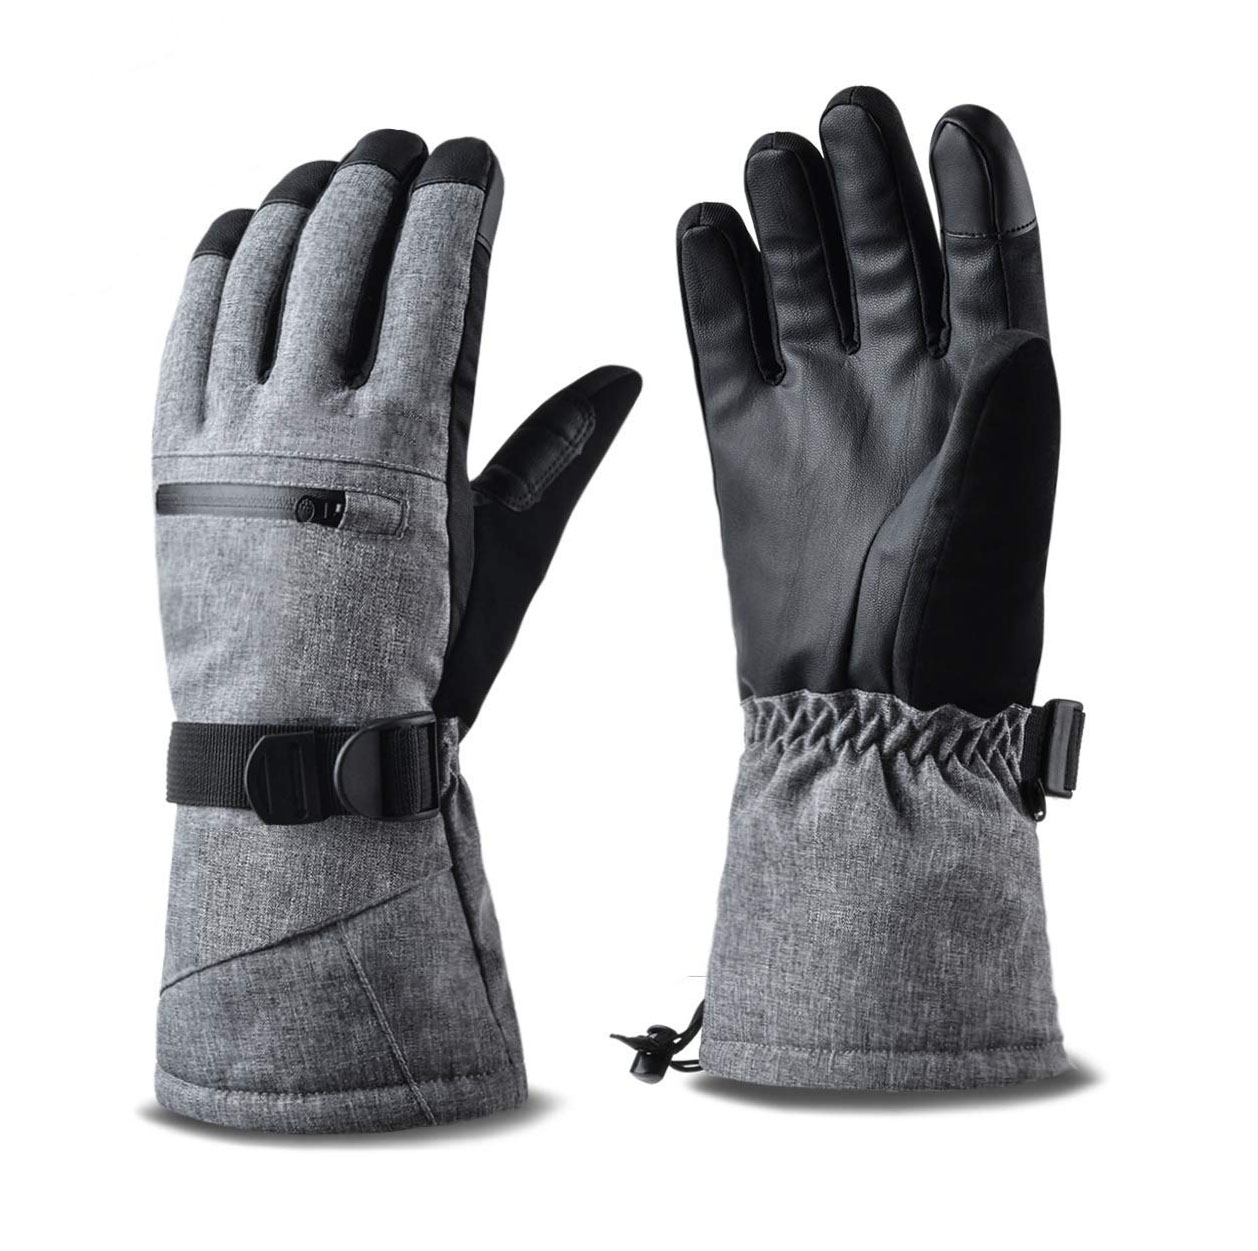 Snowproof 3M Thinsulate TPU Membrane Women's Winter Gloves with Non-Slip PU Palms ski gloves